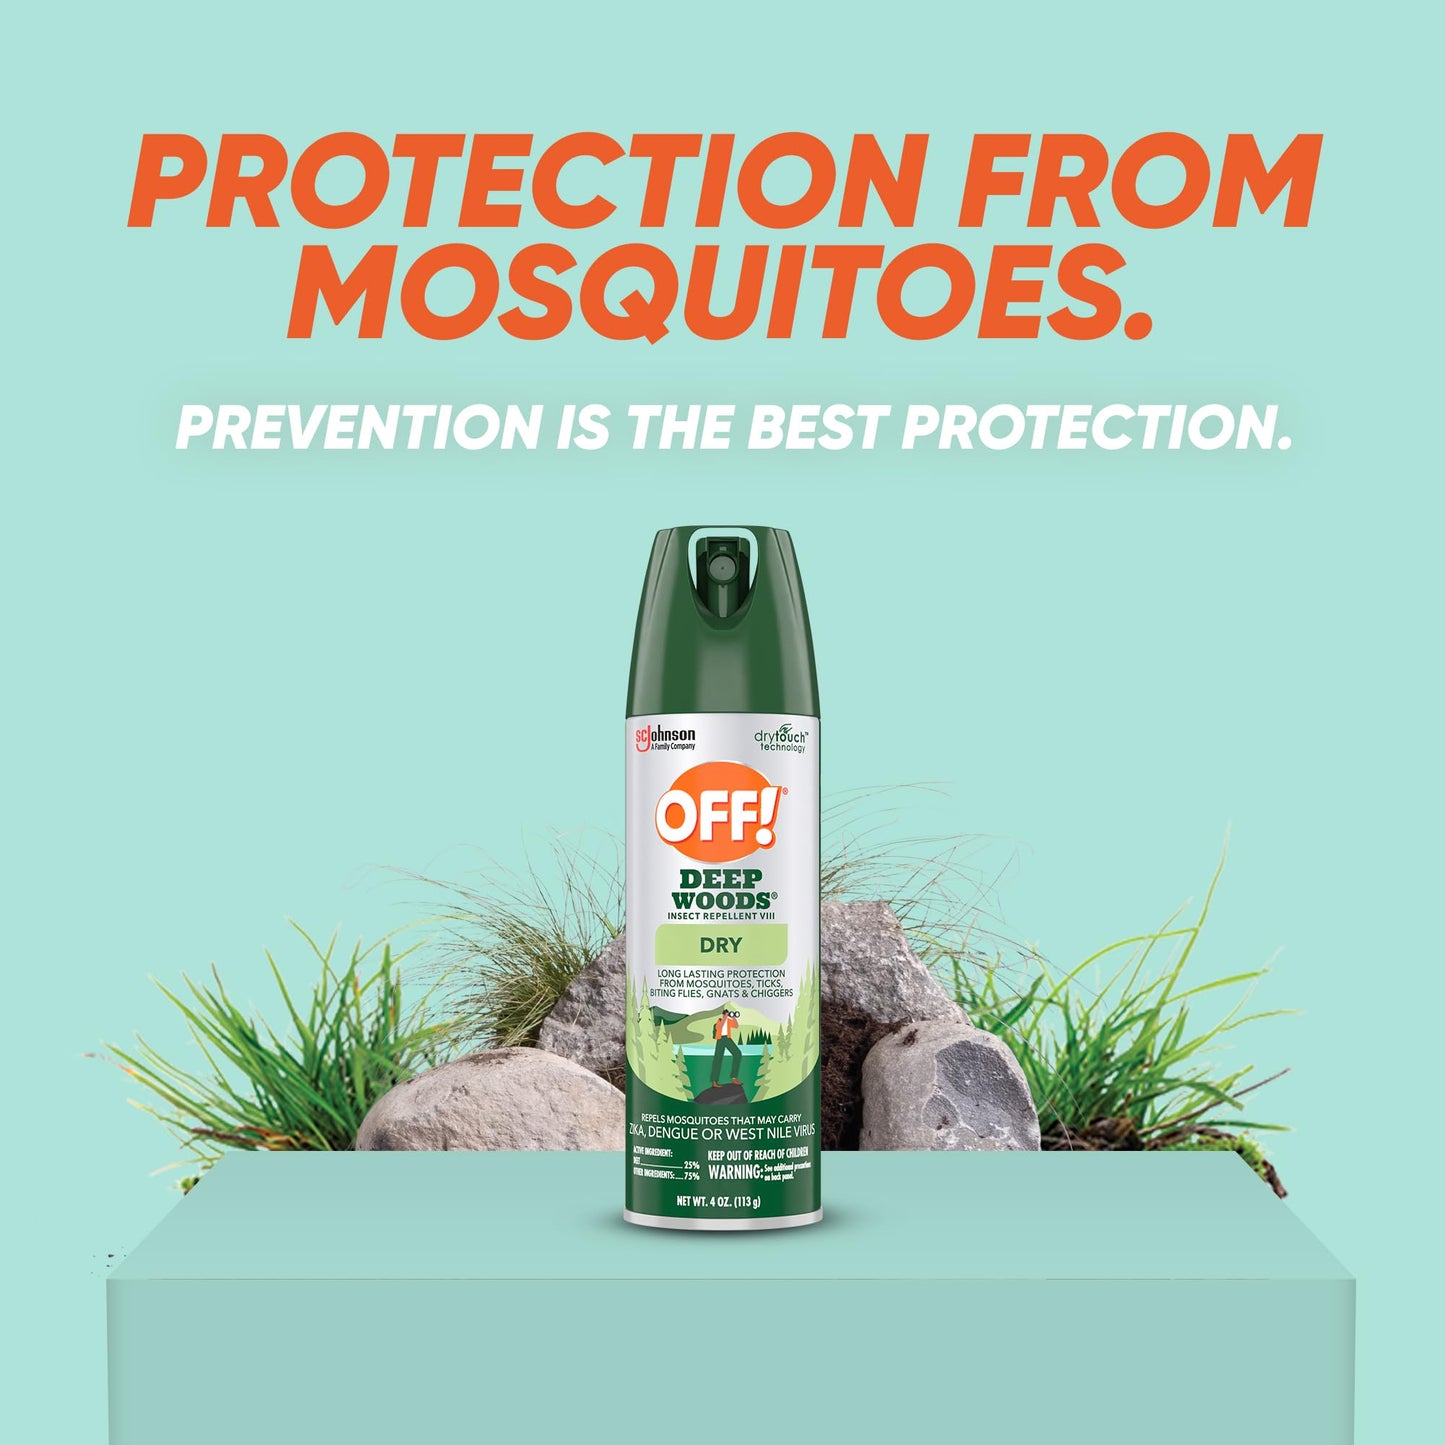 OFF! Deep Woods Insect Repellent Aerosol, Dry, Non-Greasy Formula, Bug Spray with Long Lasting Protection from Mosquitoes, 4 Oz, 2 Count